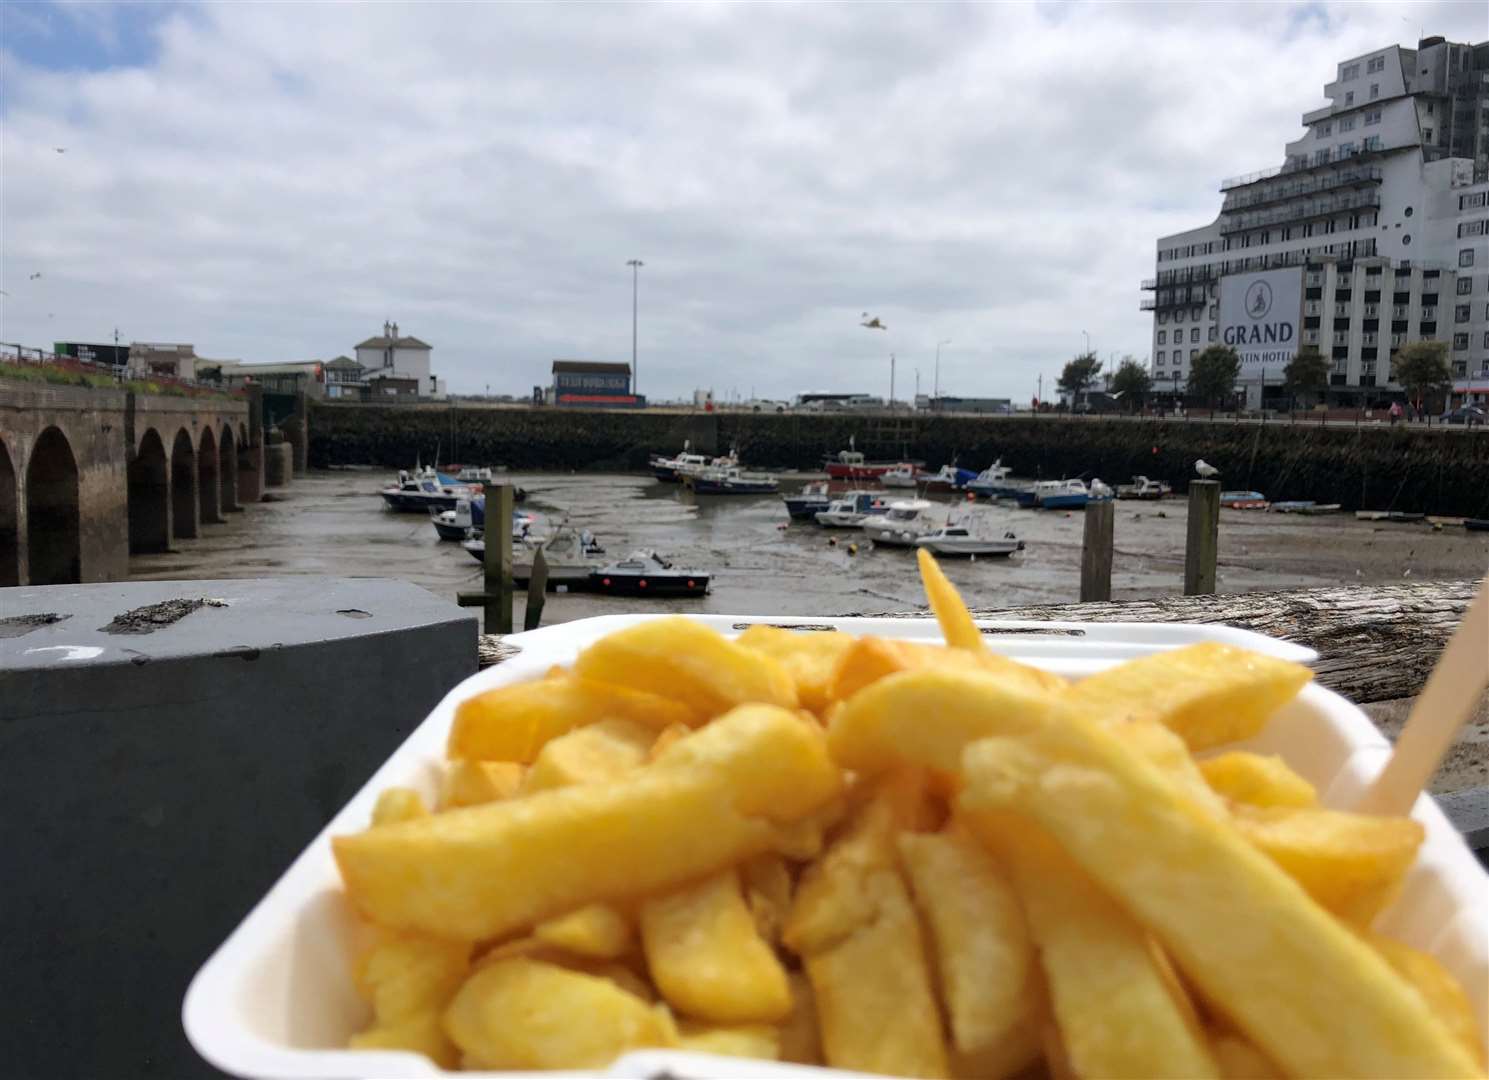 KentOnline reporter Oliver Leonard described Sandy's in Folkestone Harbour as "the perfect lunchtime treat".